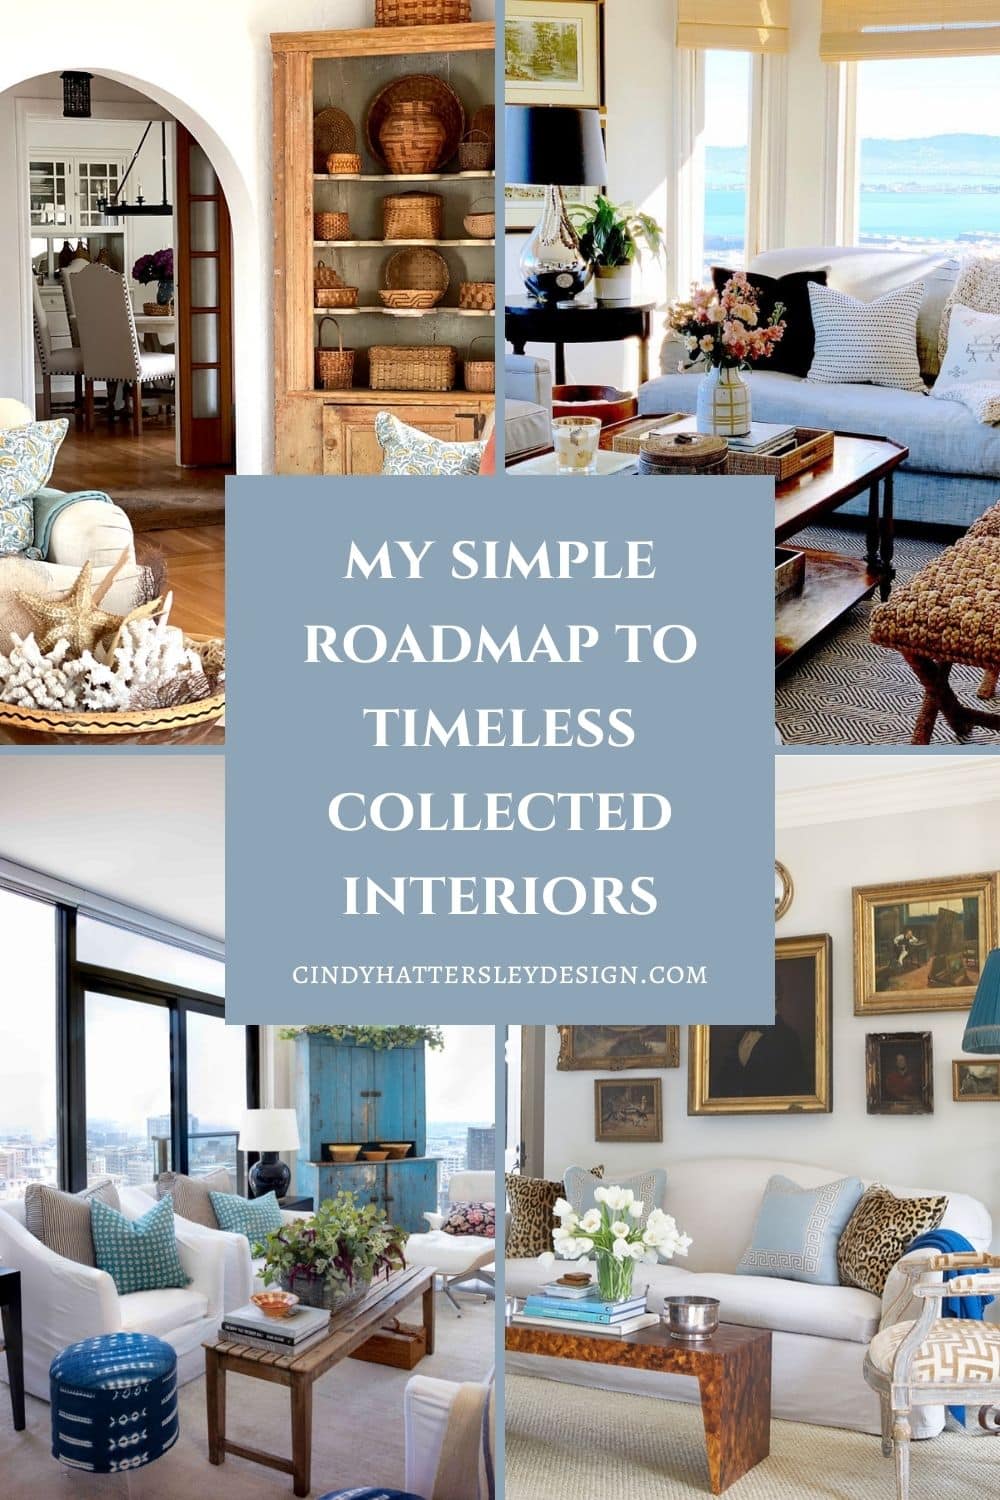 cindy hattersley's roadmap to timeless collected interiors